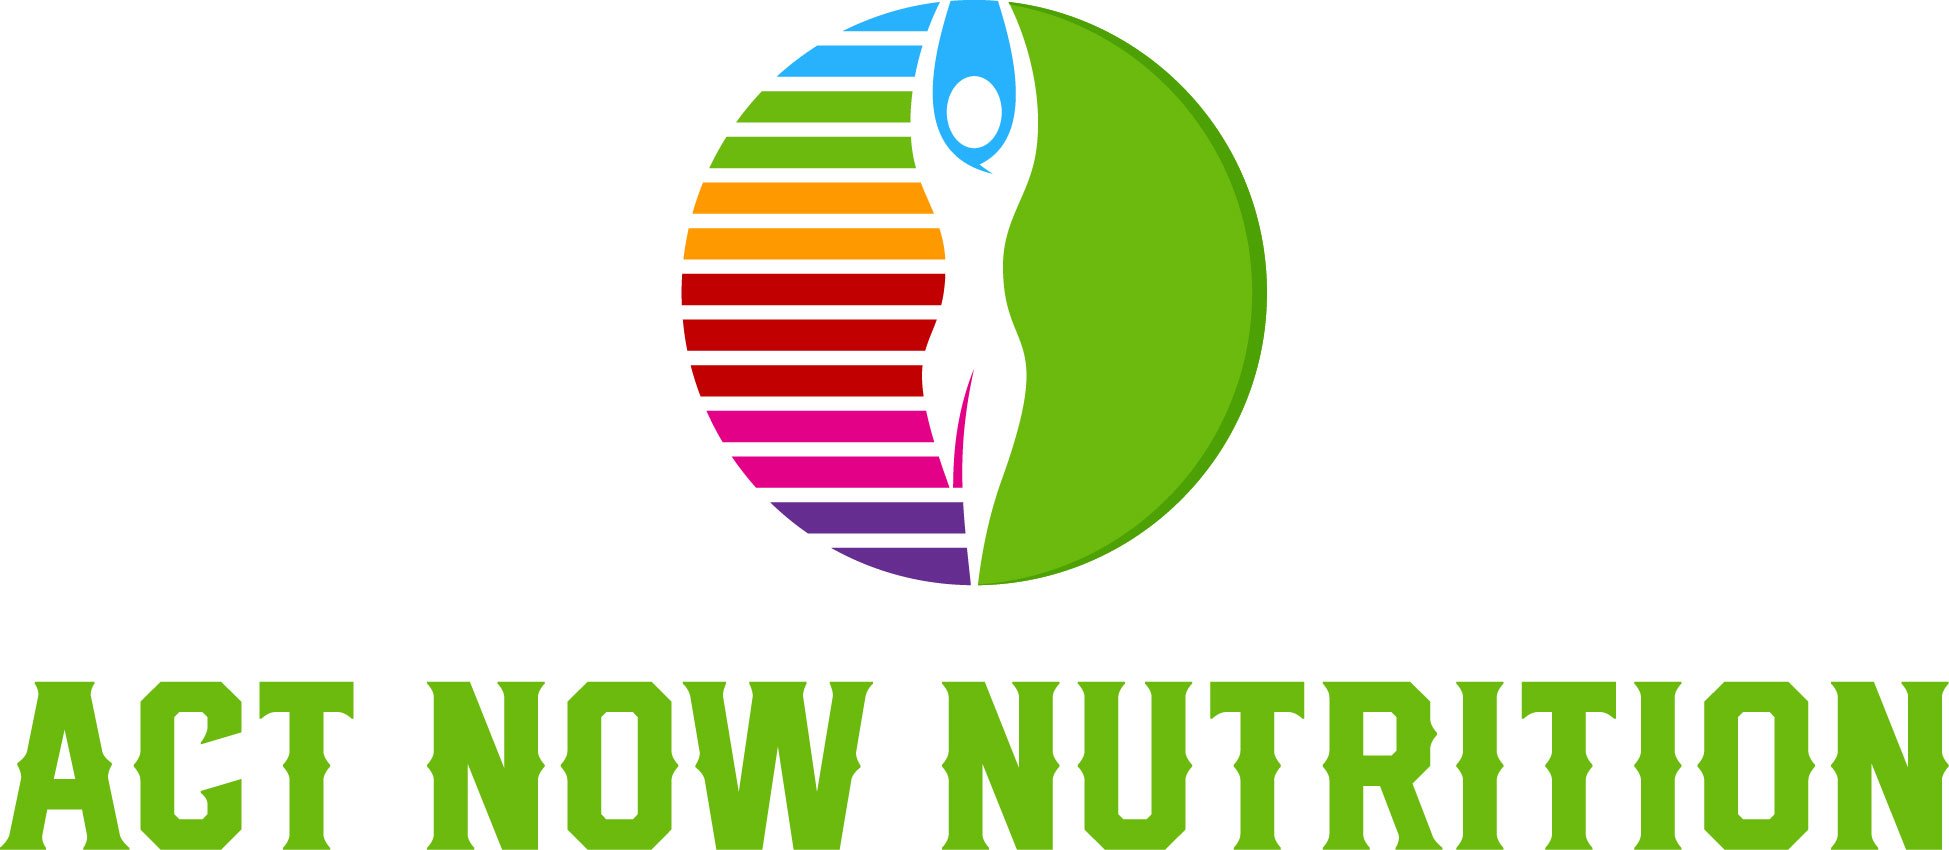 Act Now Nutrition